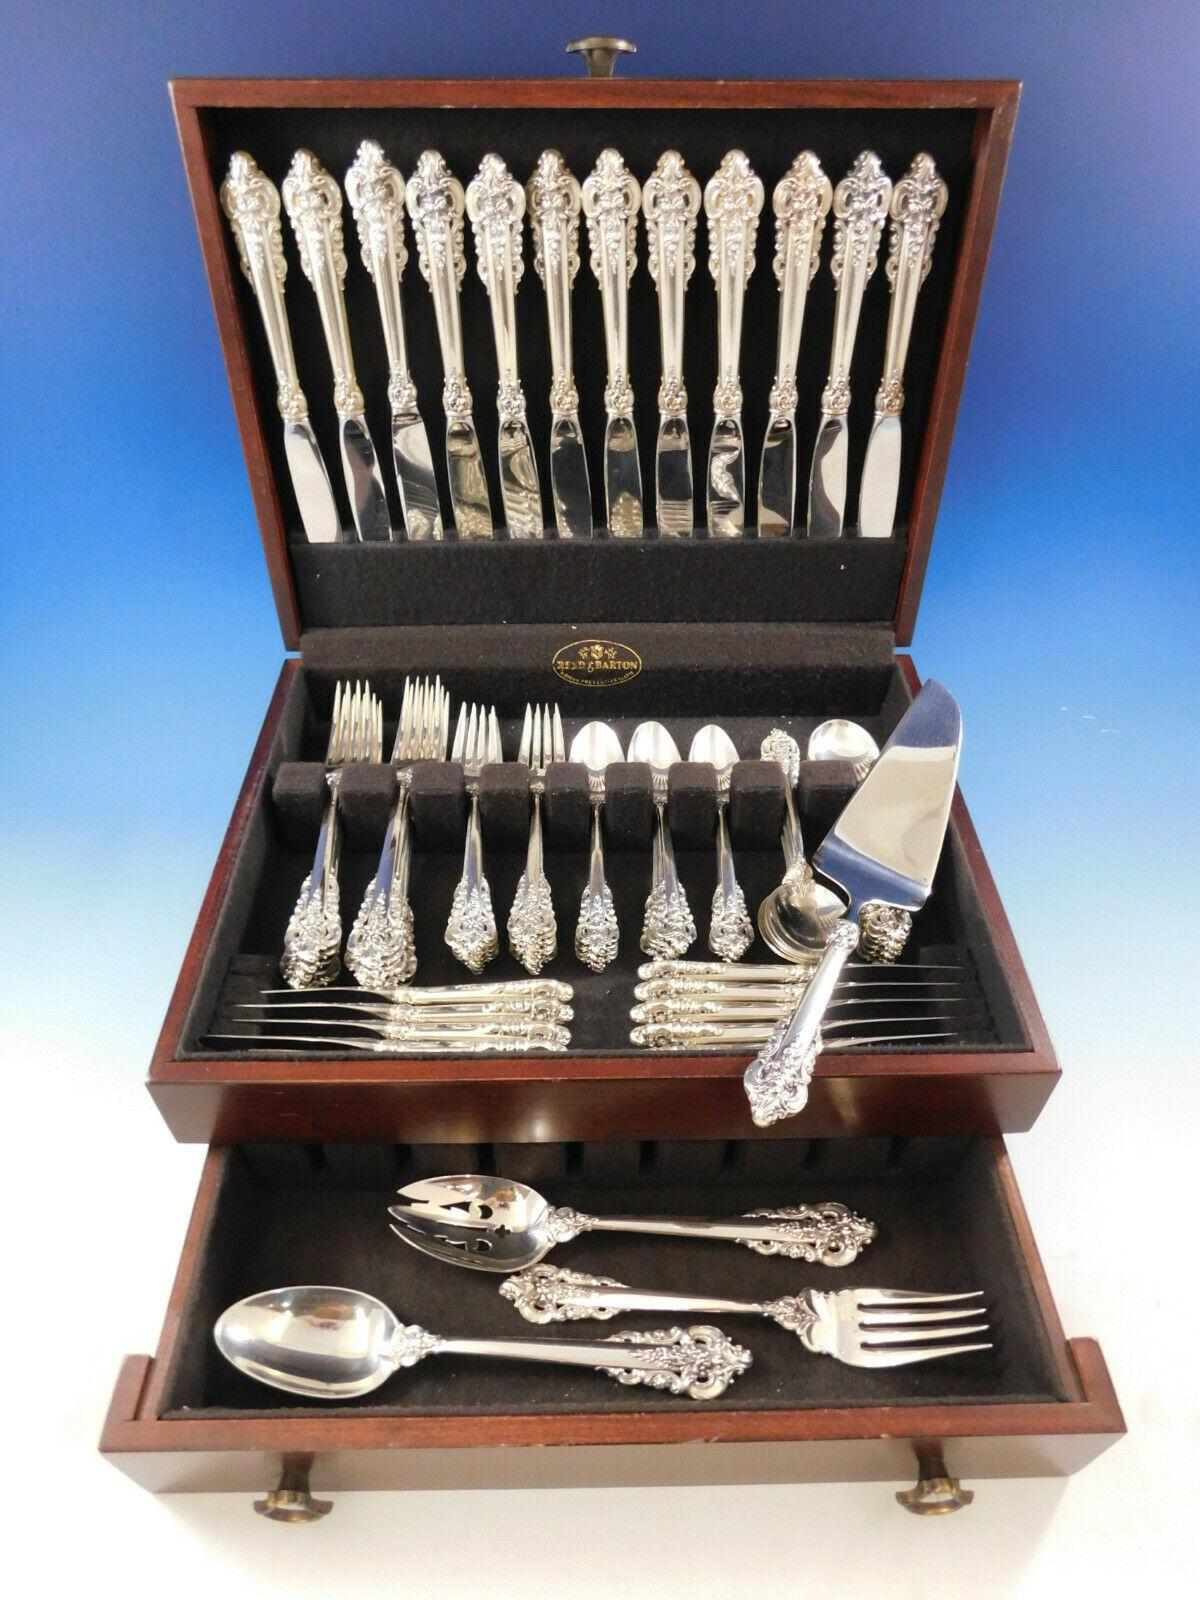 Grande Baroque by Wallace sinner size sterling silver flatware set - 76 Pieces. This set includes:

12 dinner knives, 9 3/4